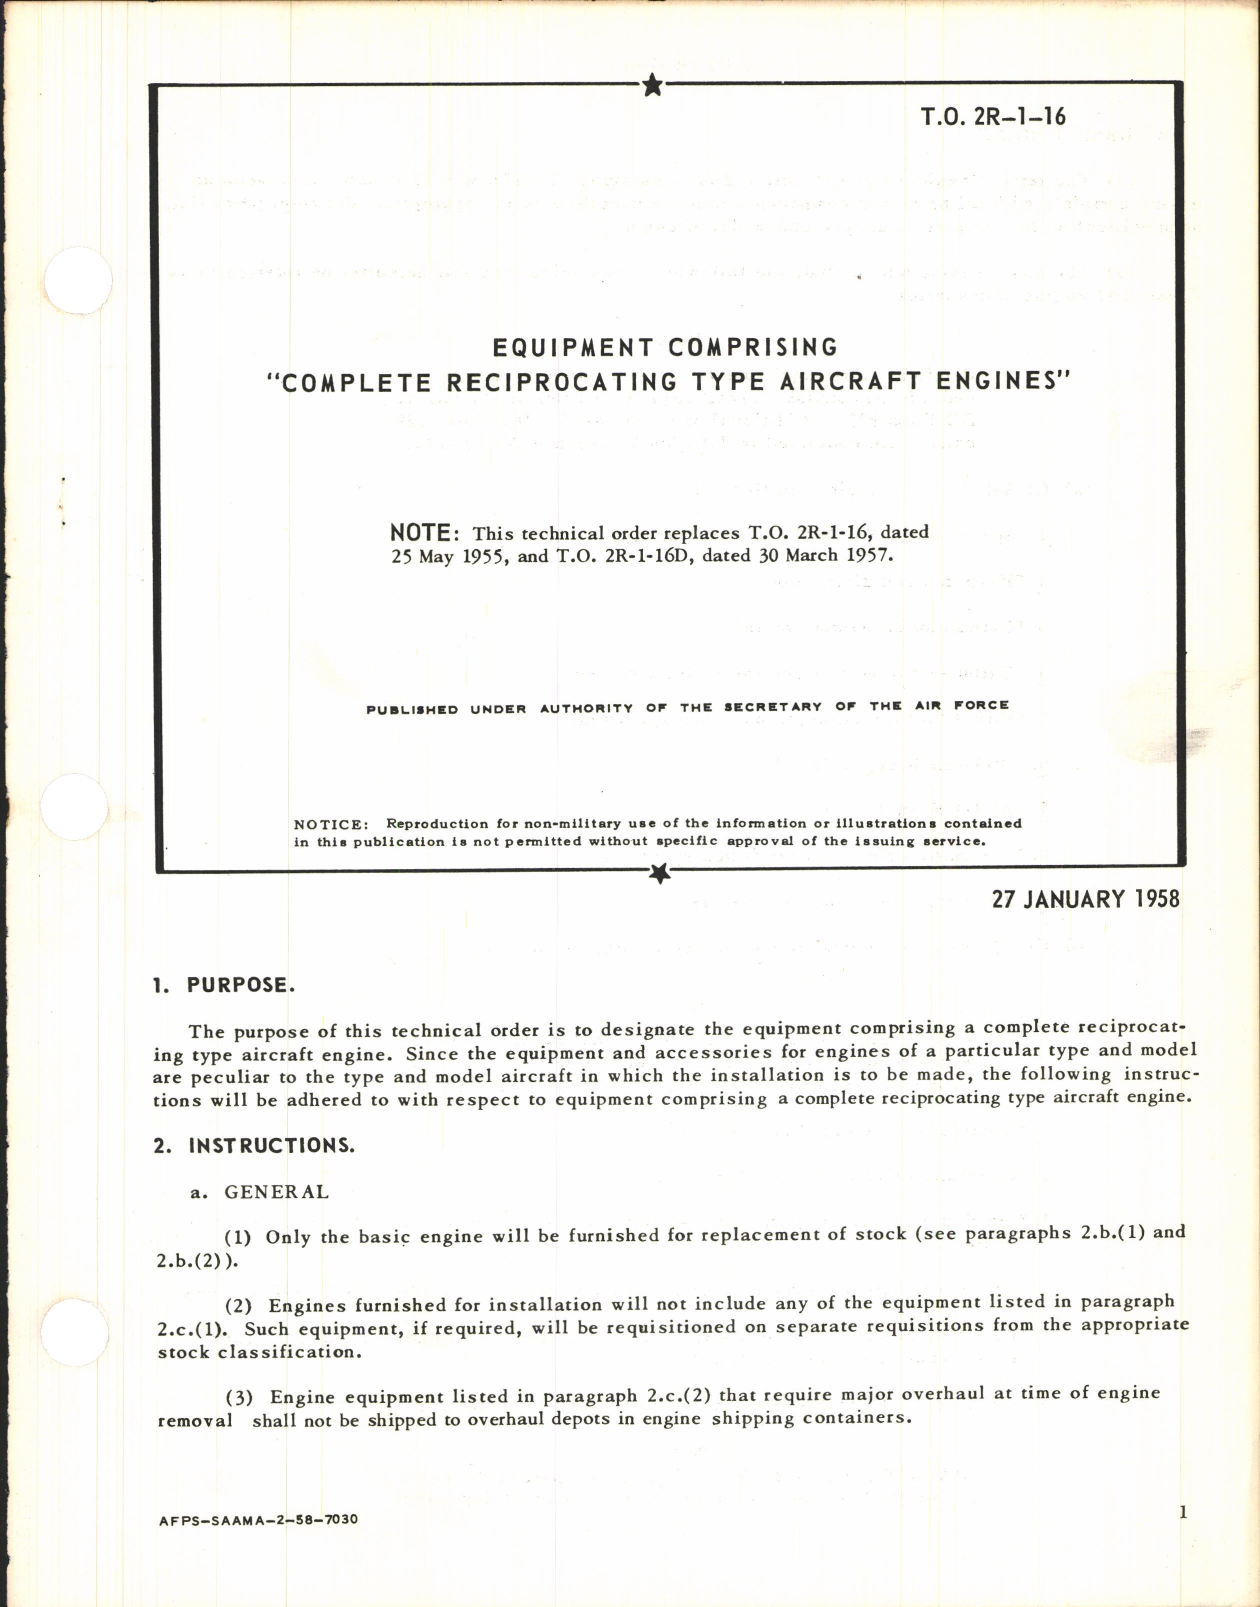 Sample page 1 from AirCorps Library document: Equipment Comprising Complete Reciprocating Type Aircraft Engines